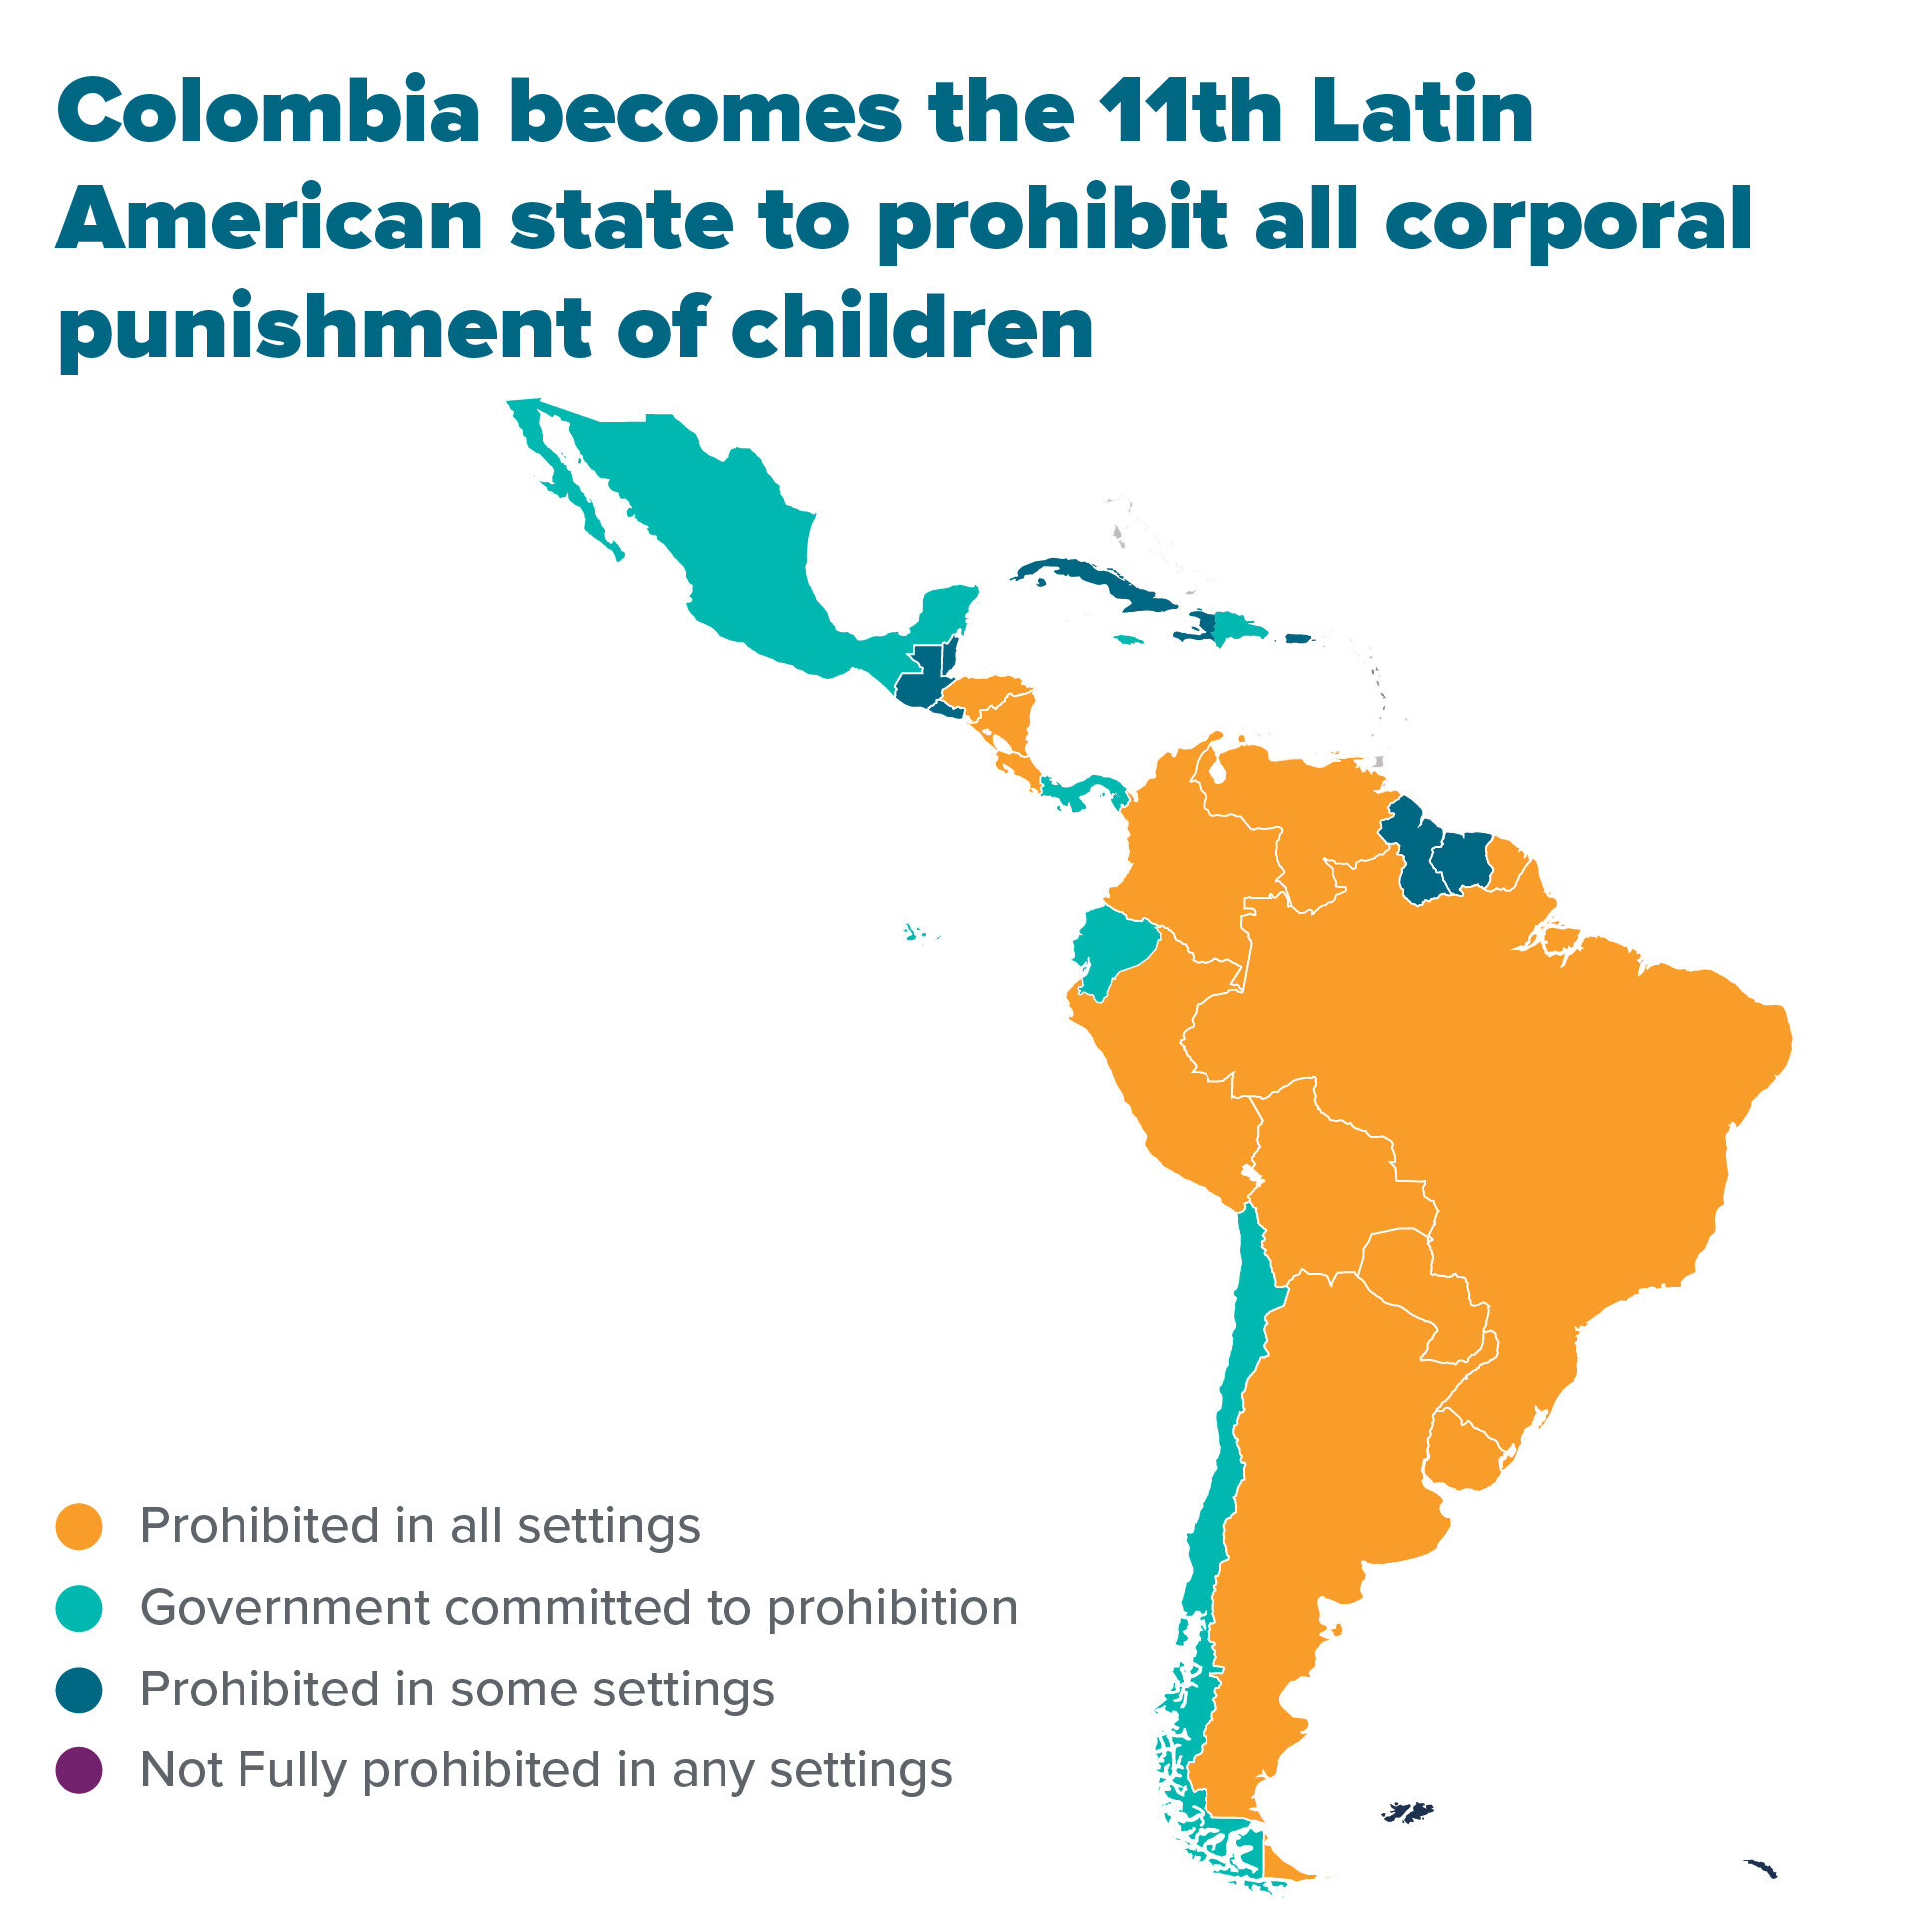 Colombia becomes the 11th Latin American state to prohibit all corporal punishment of children